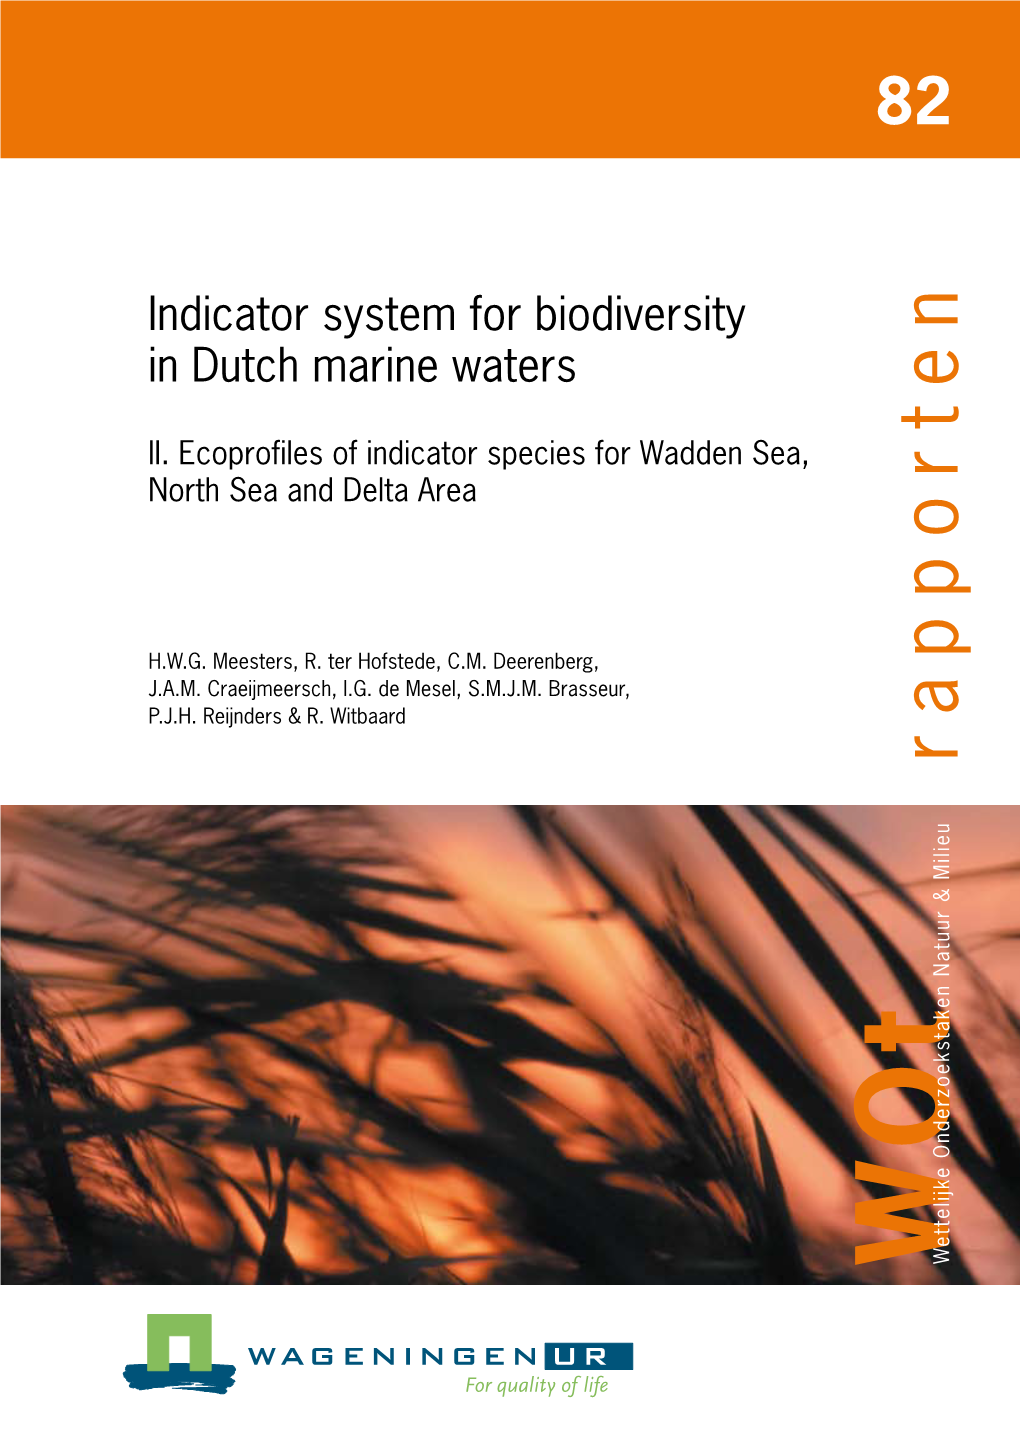 Indicator System for Biodiversity in Dutch Marine Waters